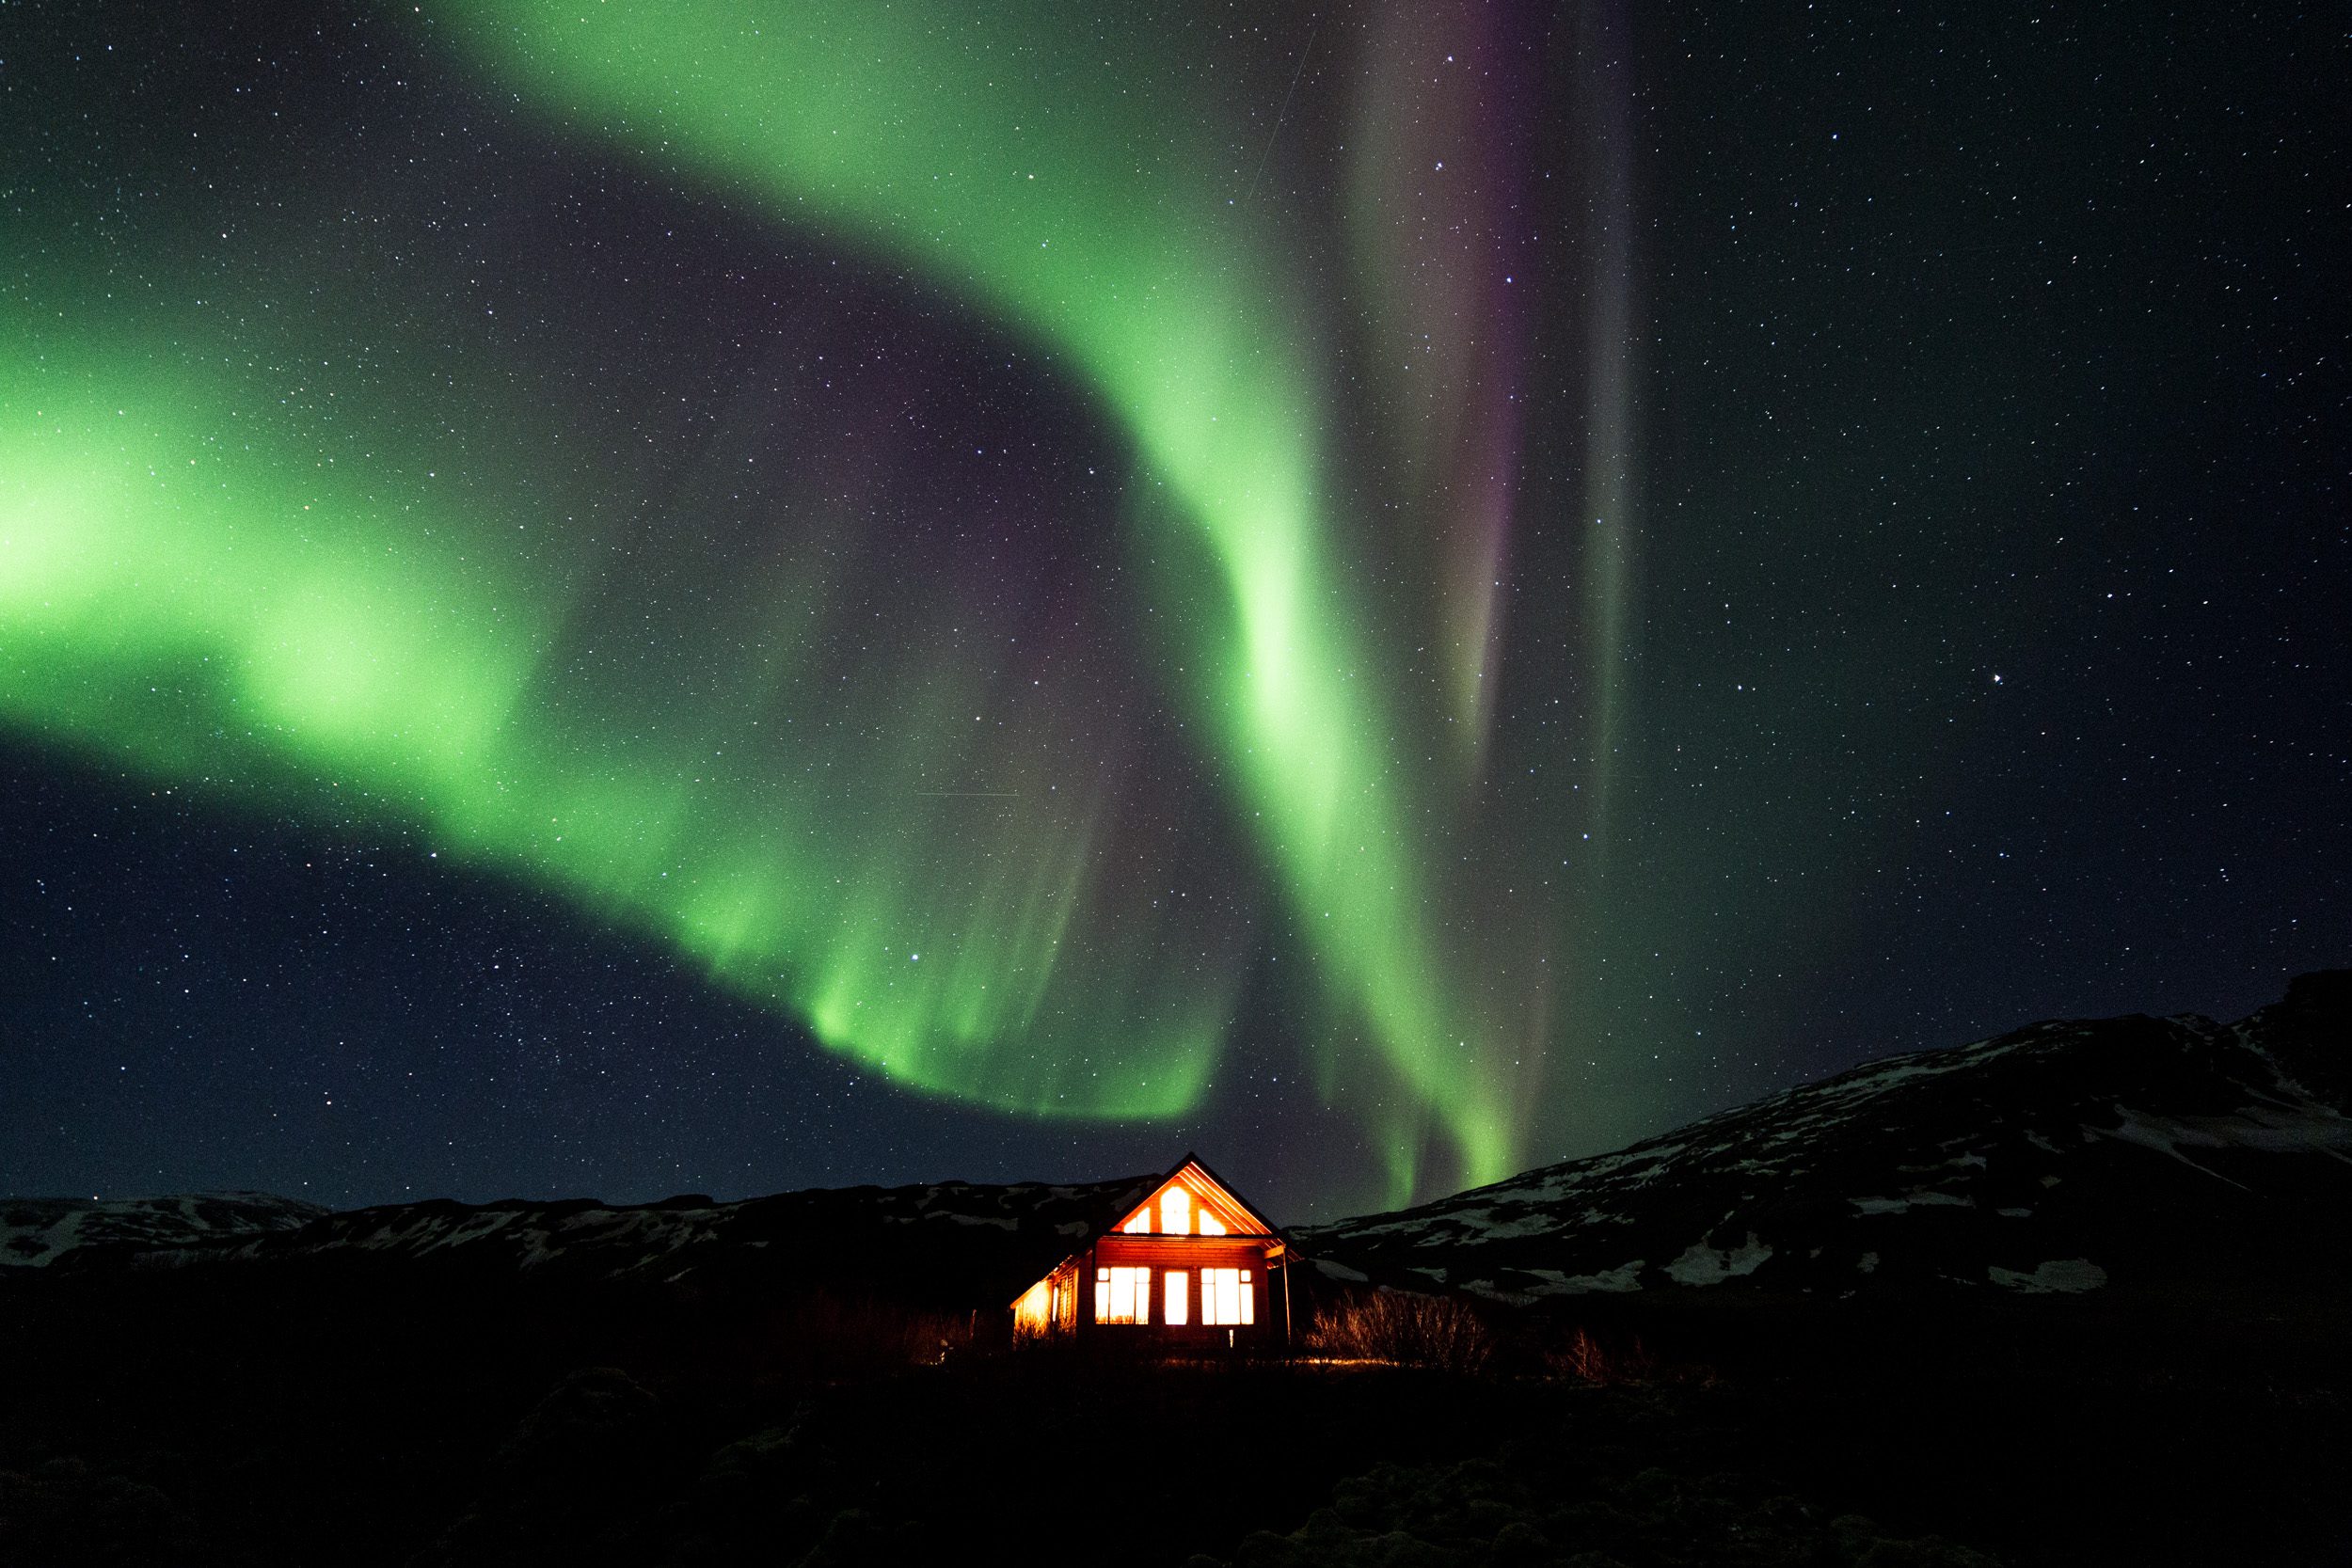 The northern lights above a remote summer house in Iceland